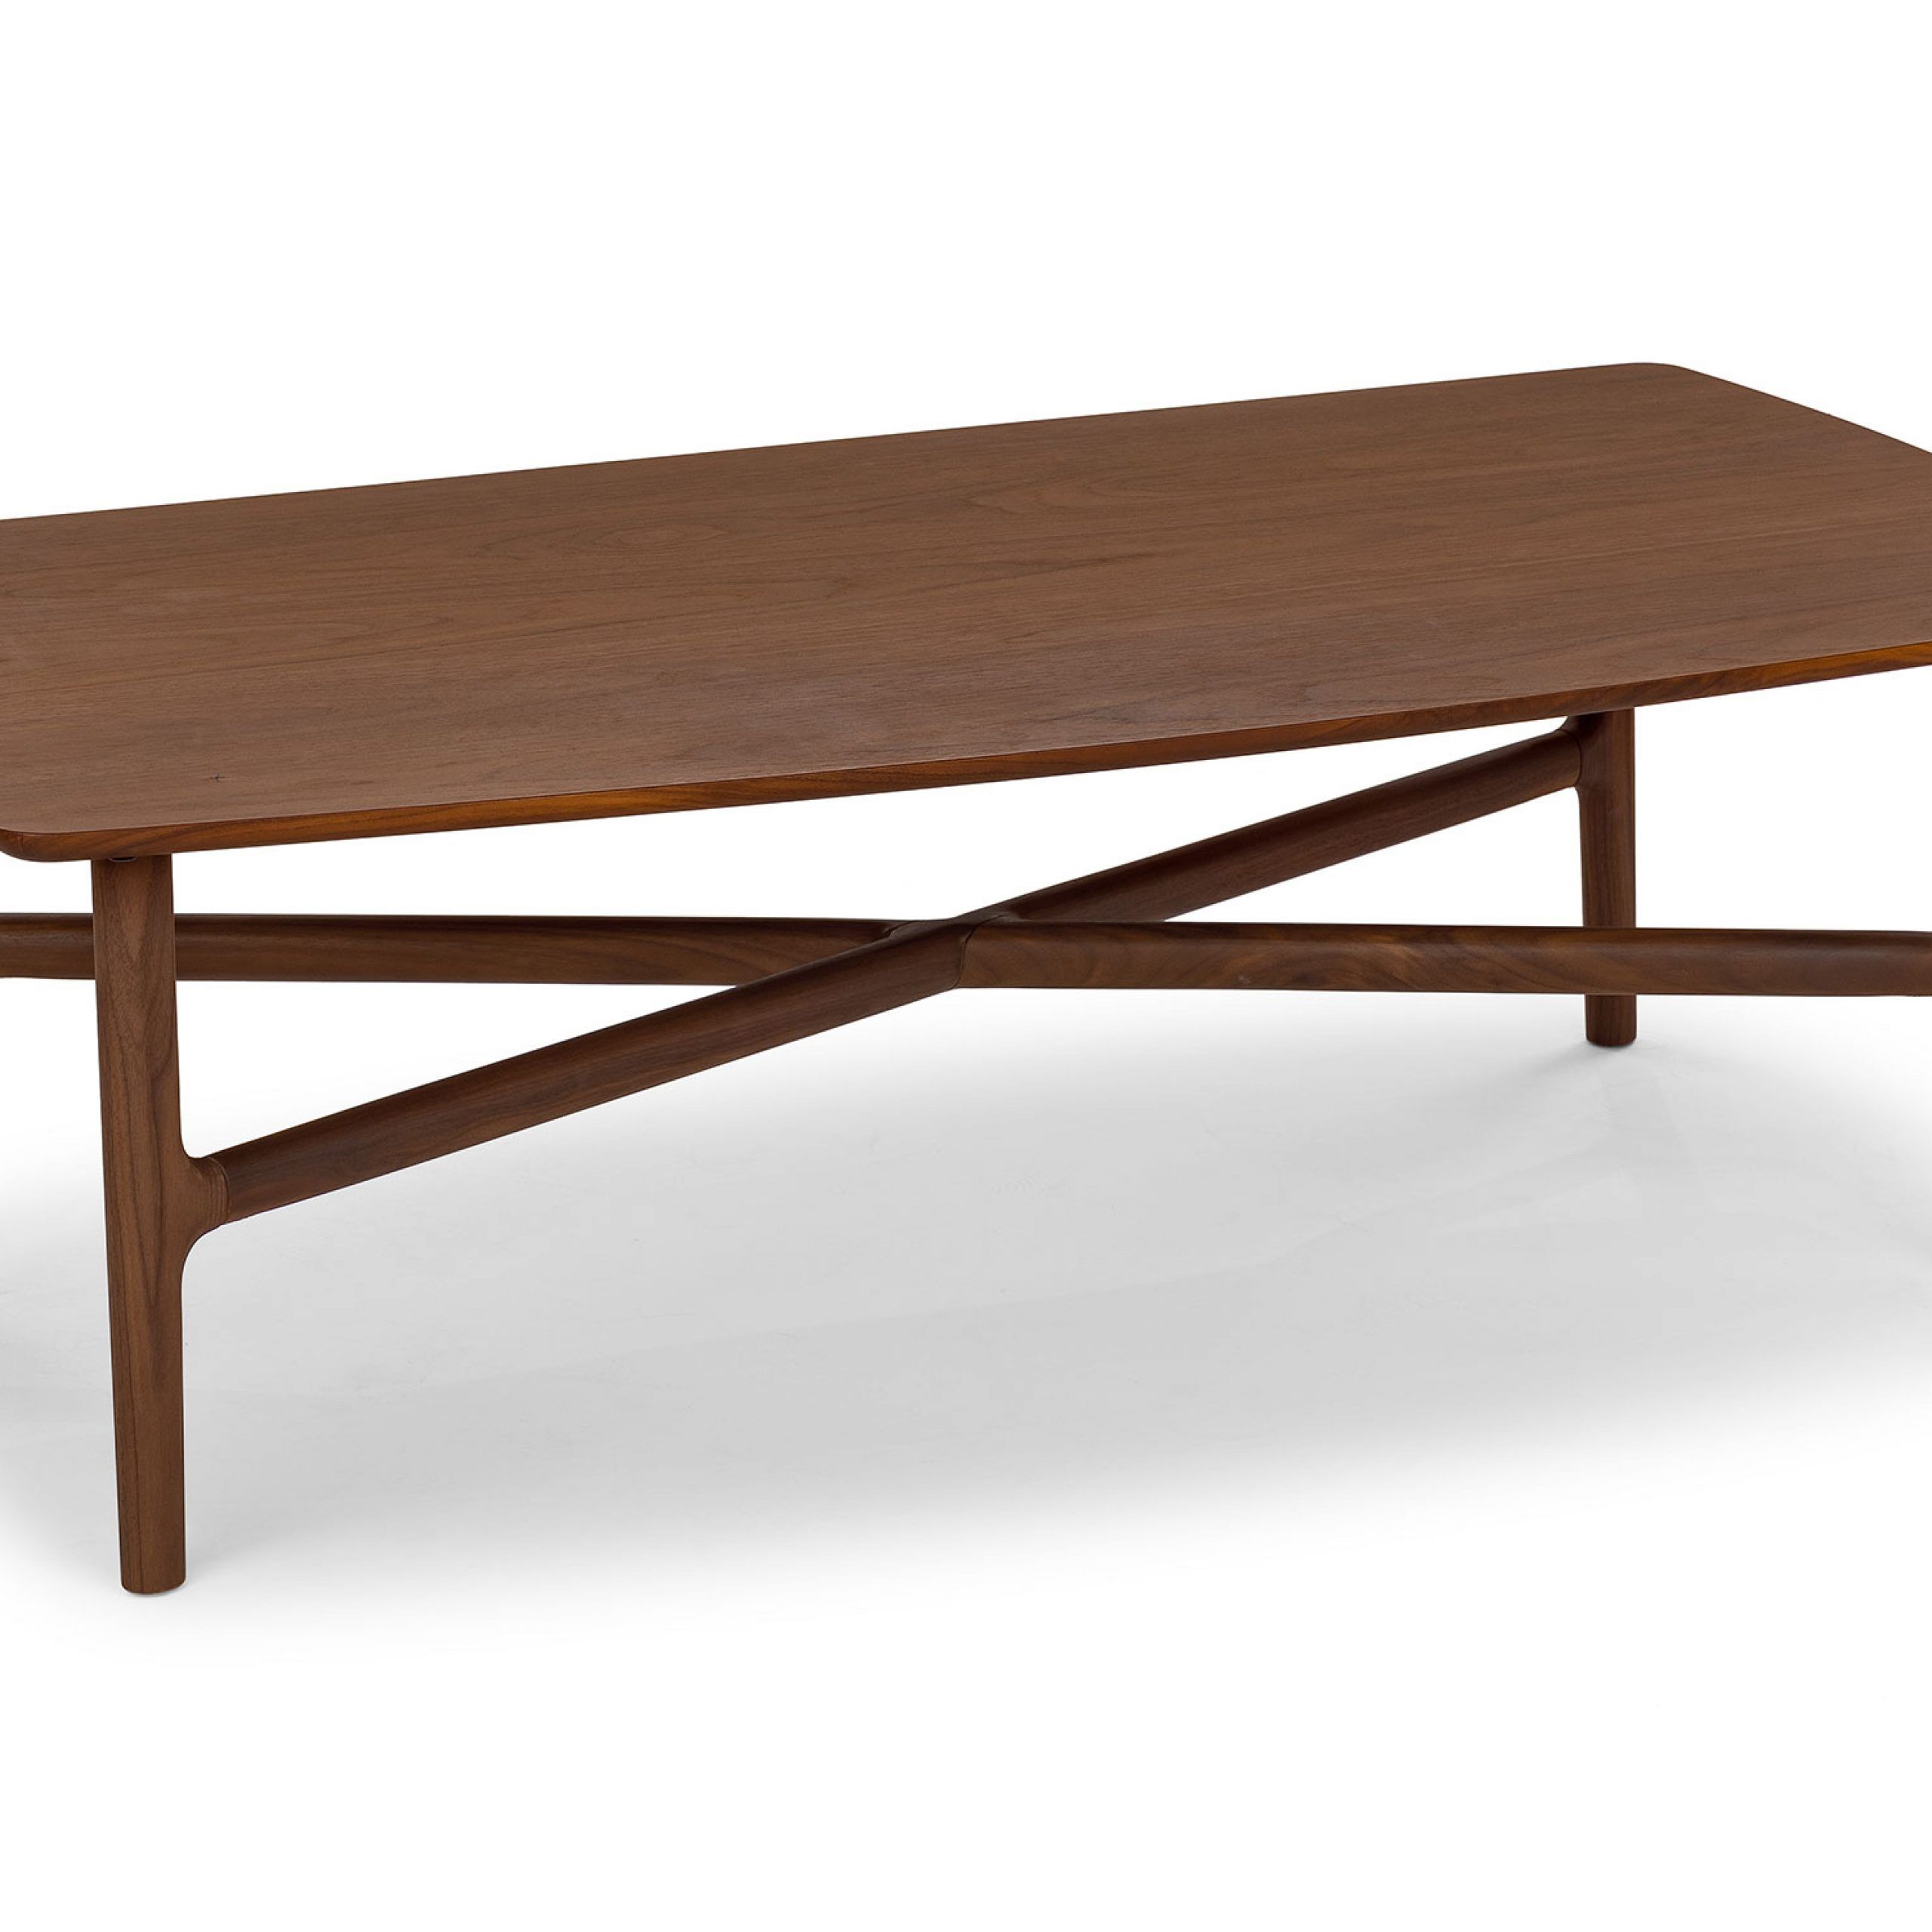 Brezza Matte Walnut Rectangular Coffee Table | Article For Matte Coffee Tables (View 3 of 20)